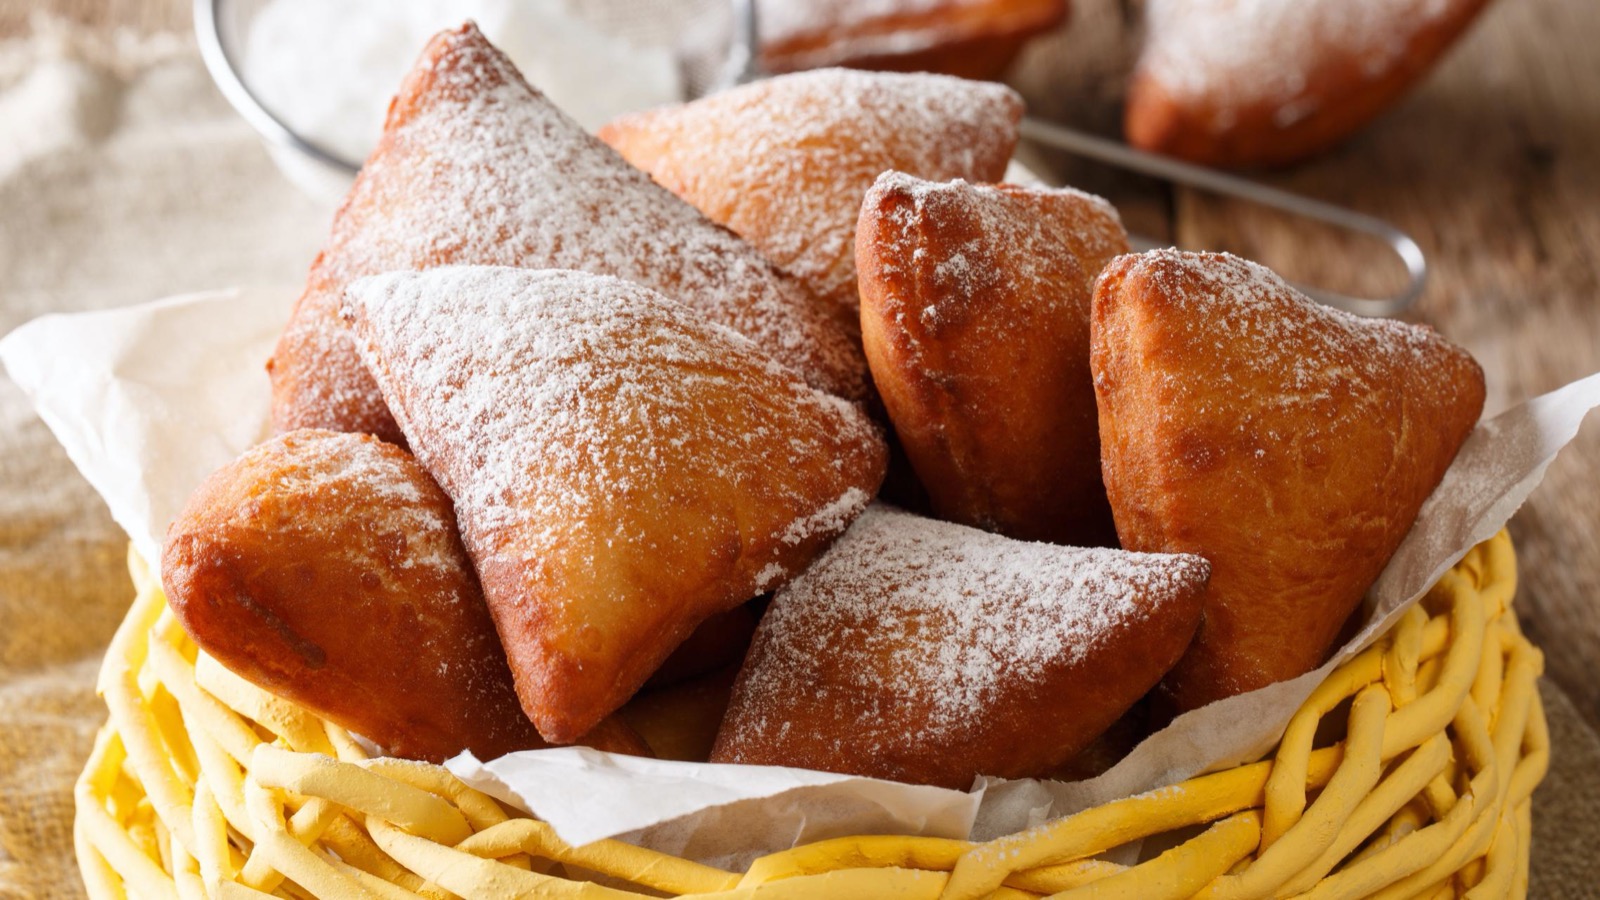 🍰 Don’t Freak Out, But We Can Guess Your Eye Color Based on the Desserts You Eat Beignets